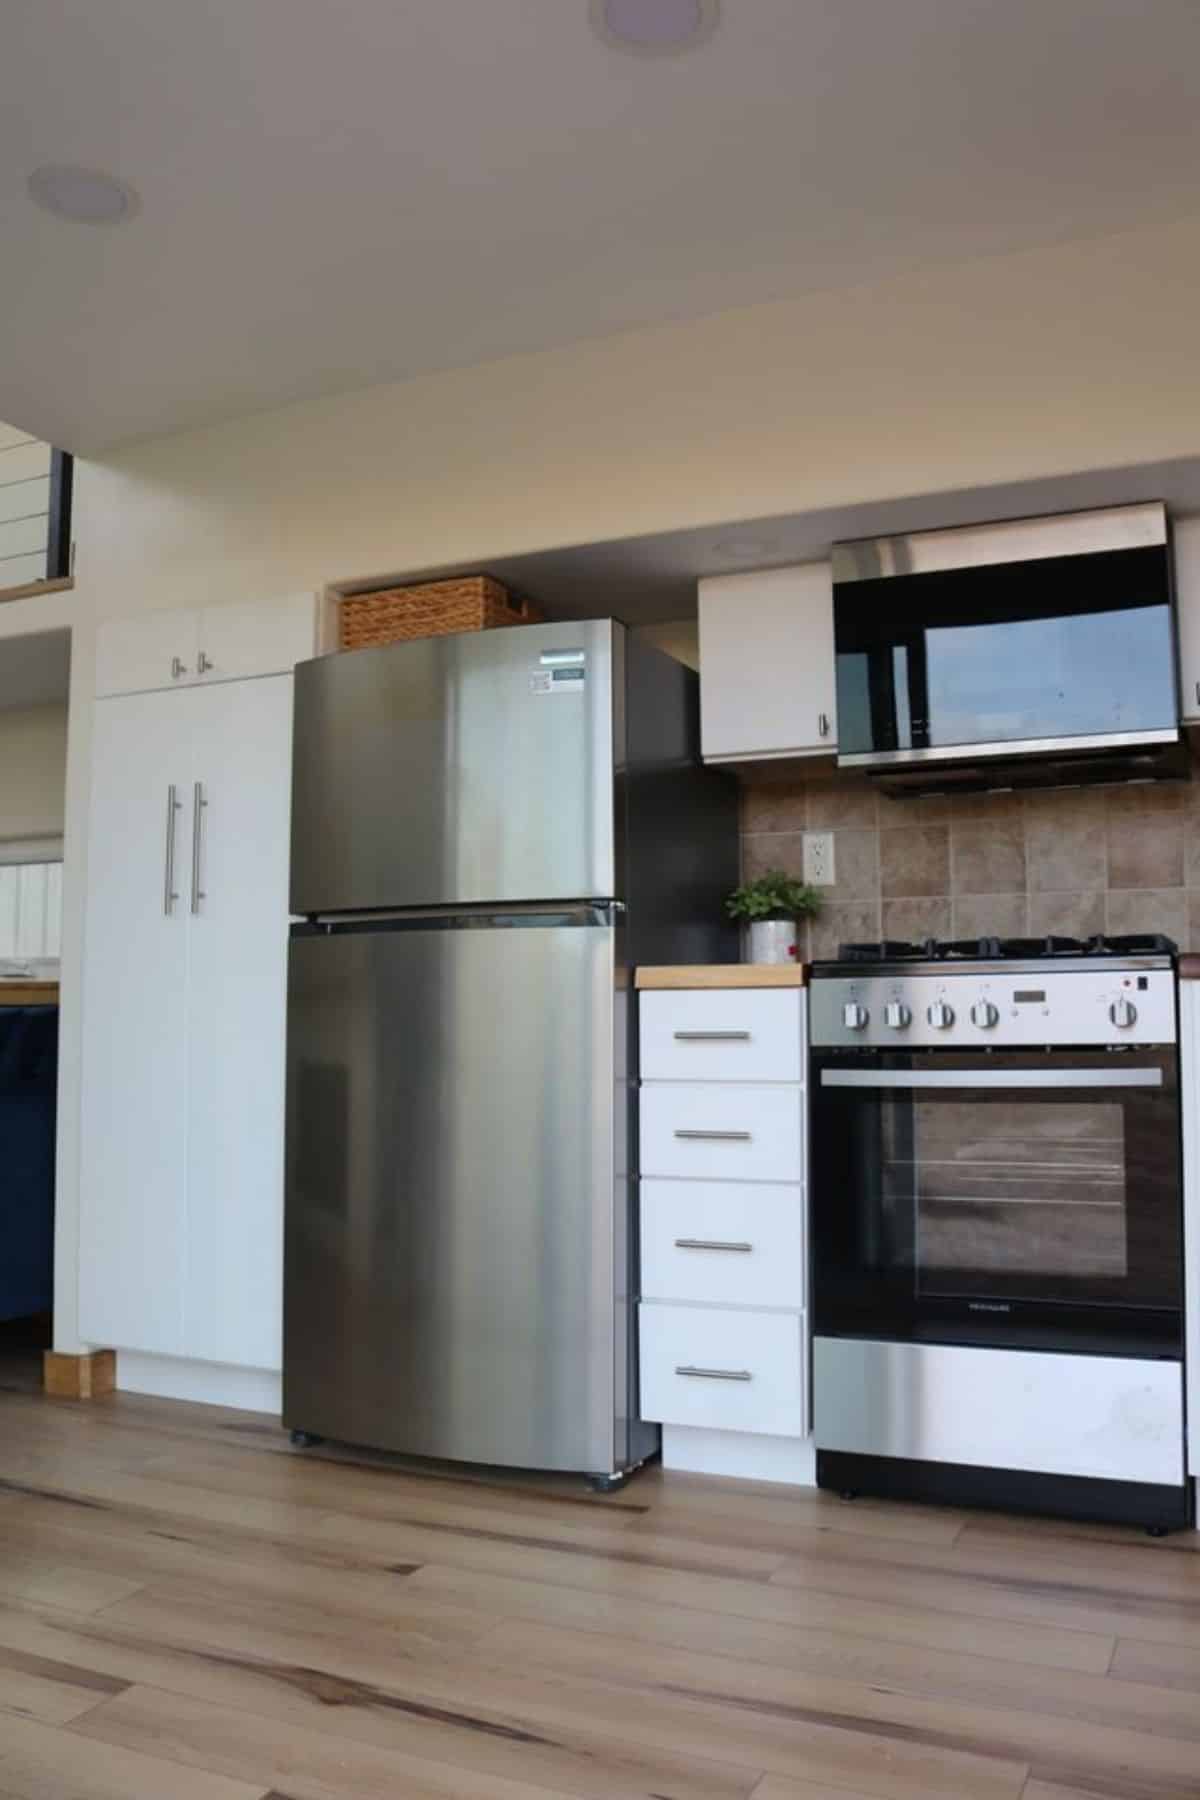 stainless steel refrigerator, 4 burner gas range and storage cabinets included in the kitchen area